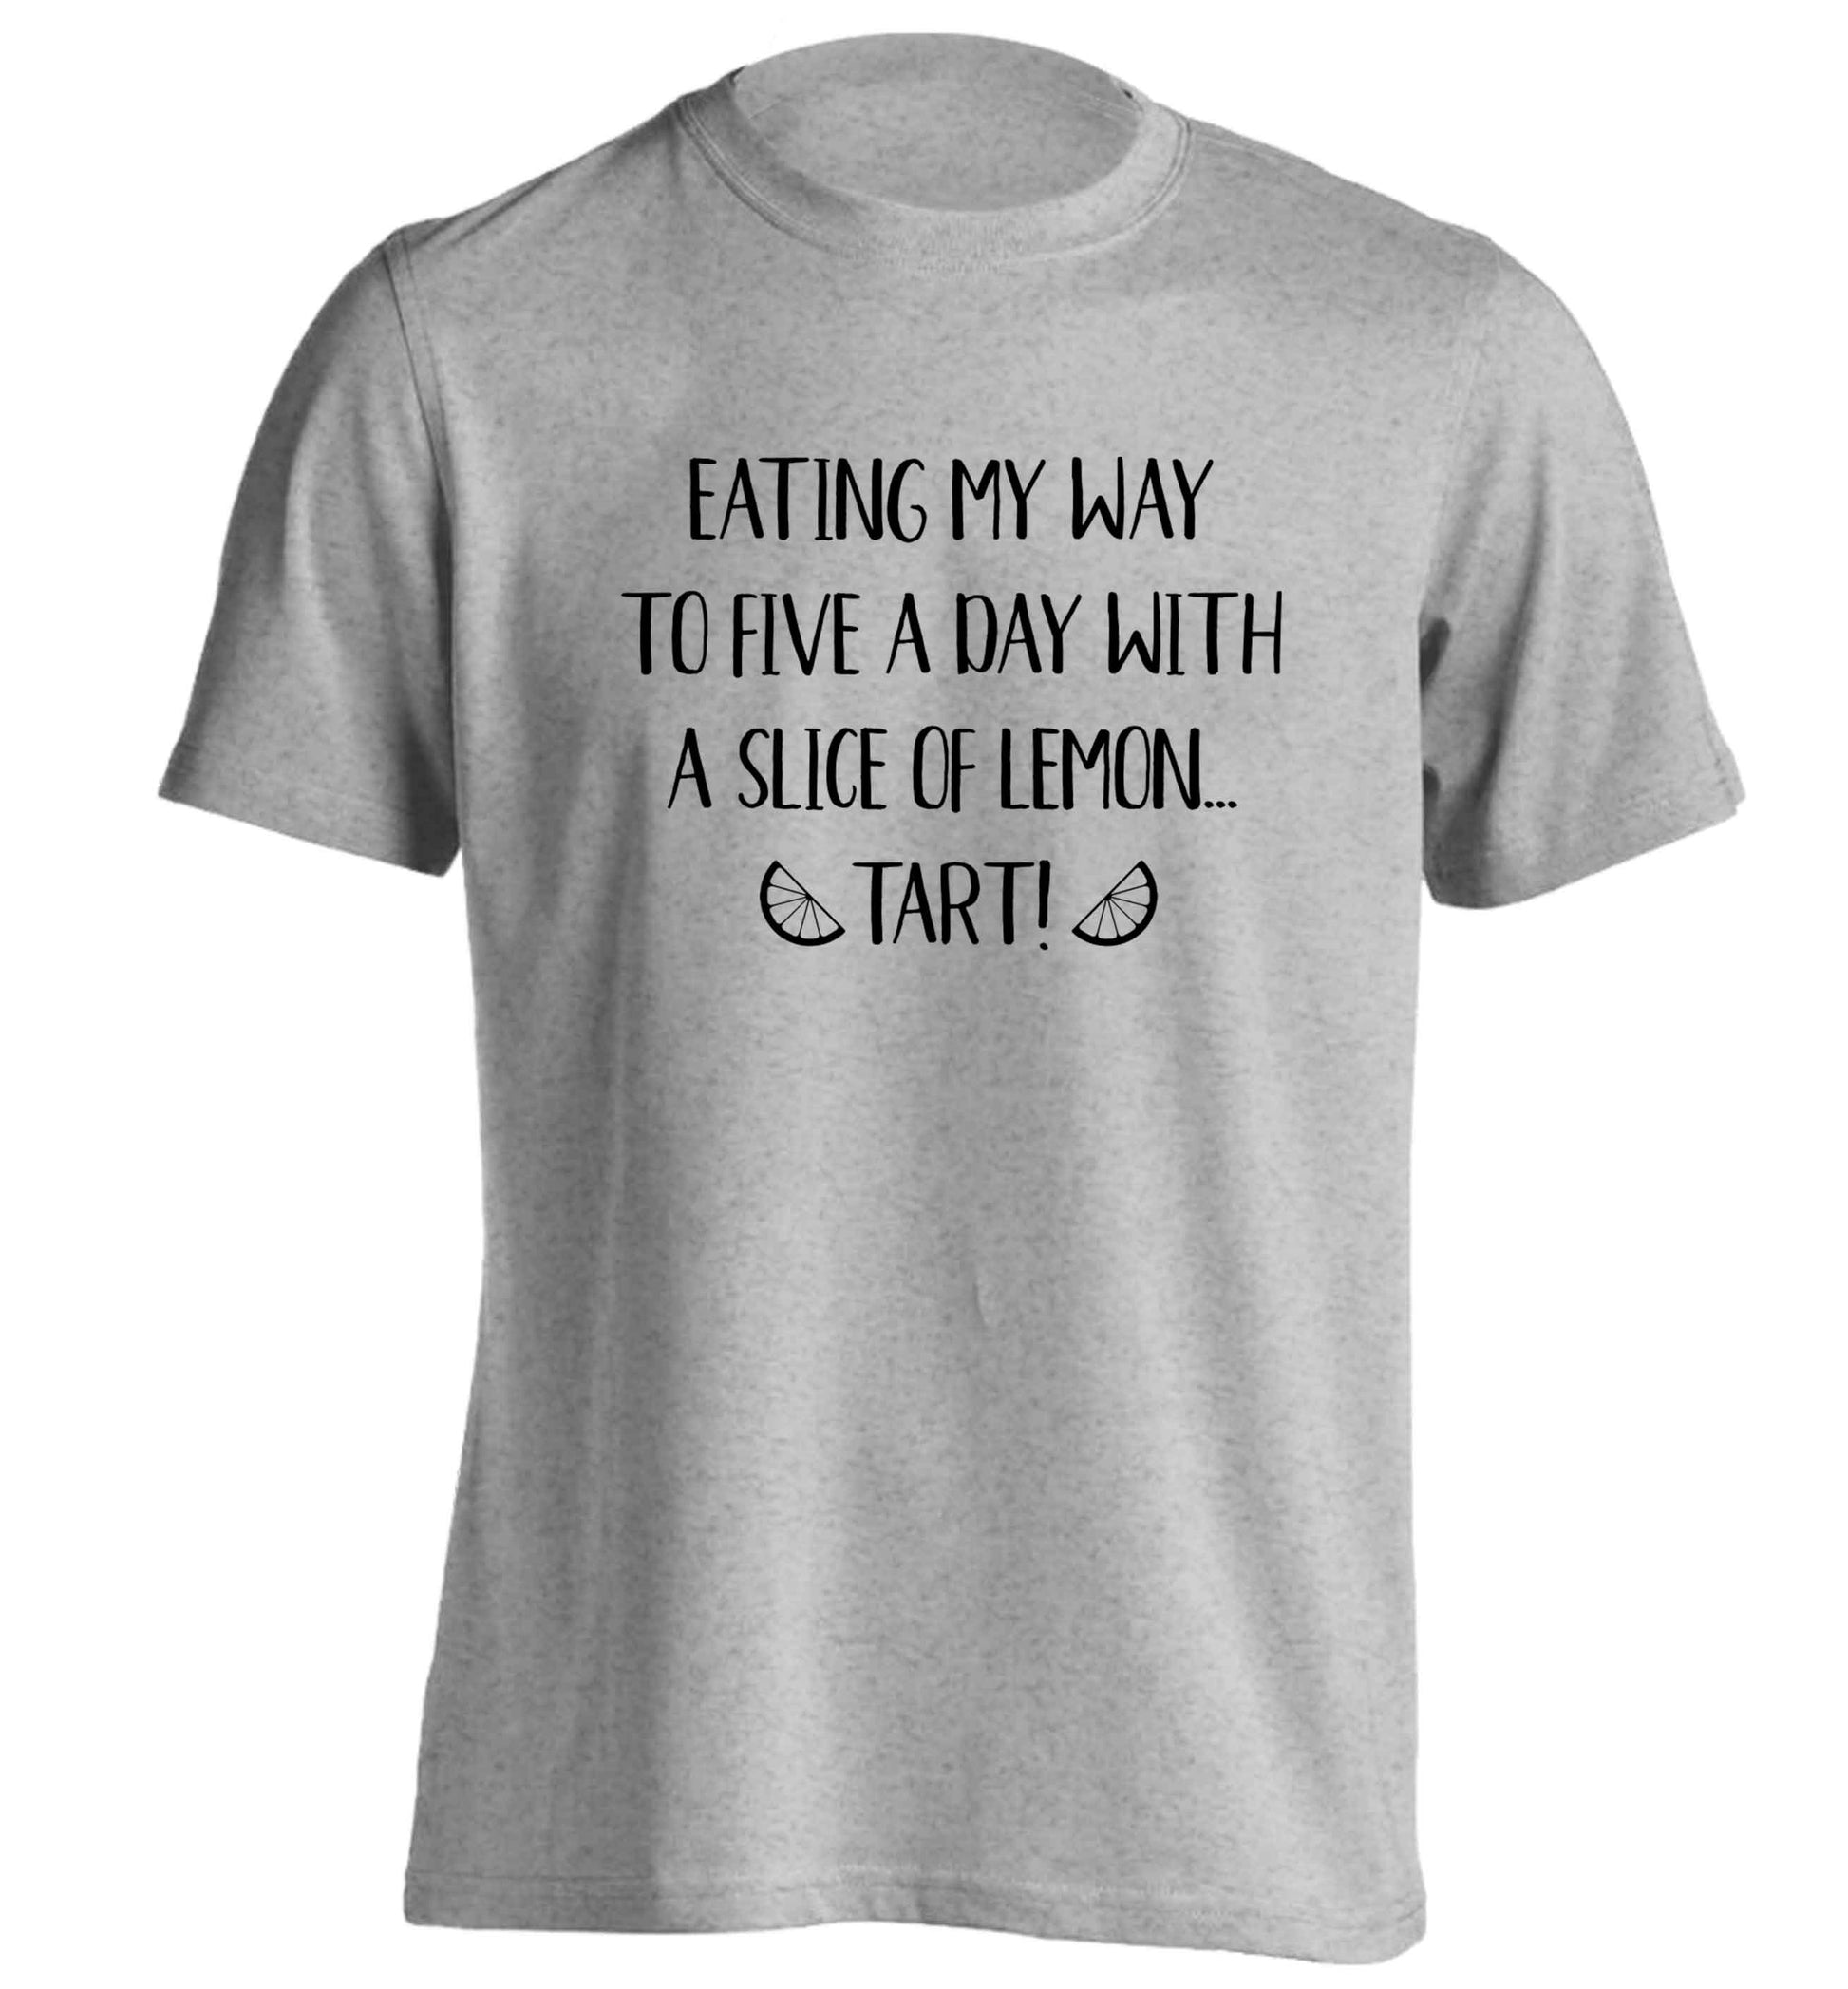 Eating my way to five a day with a slice of lemon tart adults unisex grey Tshirt 2XL